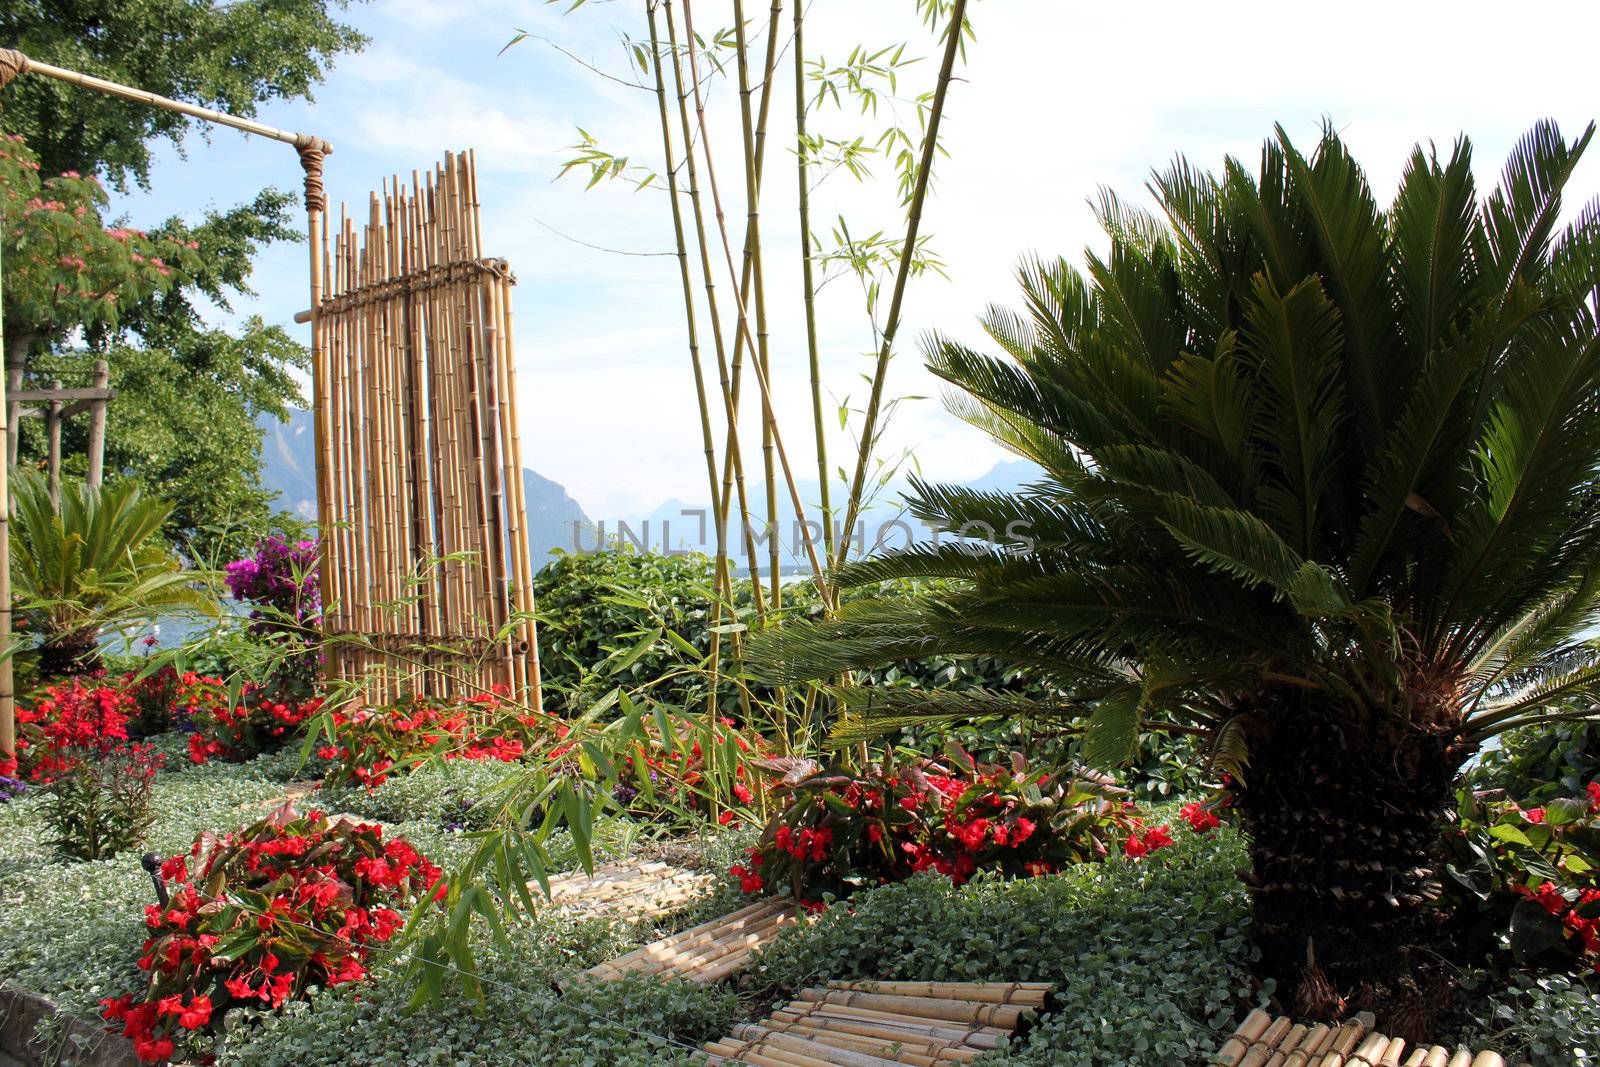 Paradisiac garden with bamboo, palm tree and red flowers in front of mountains